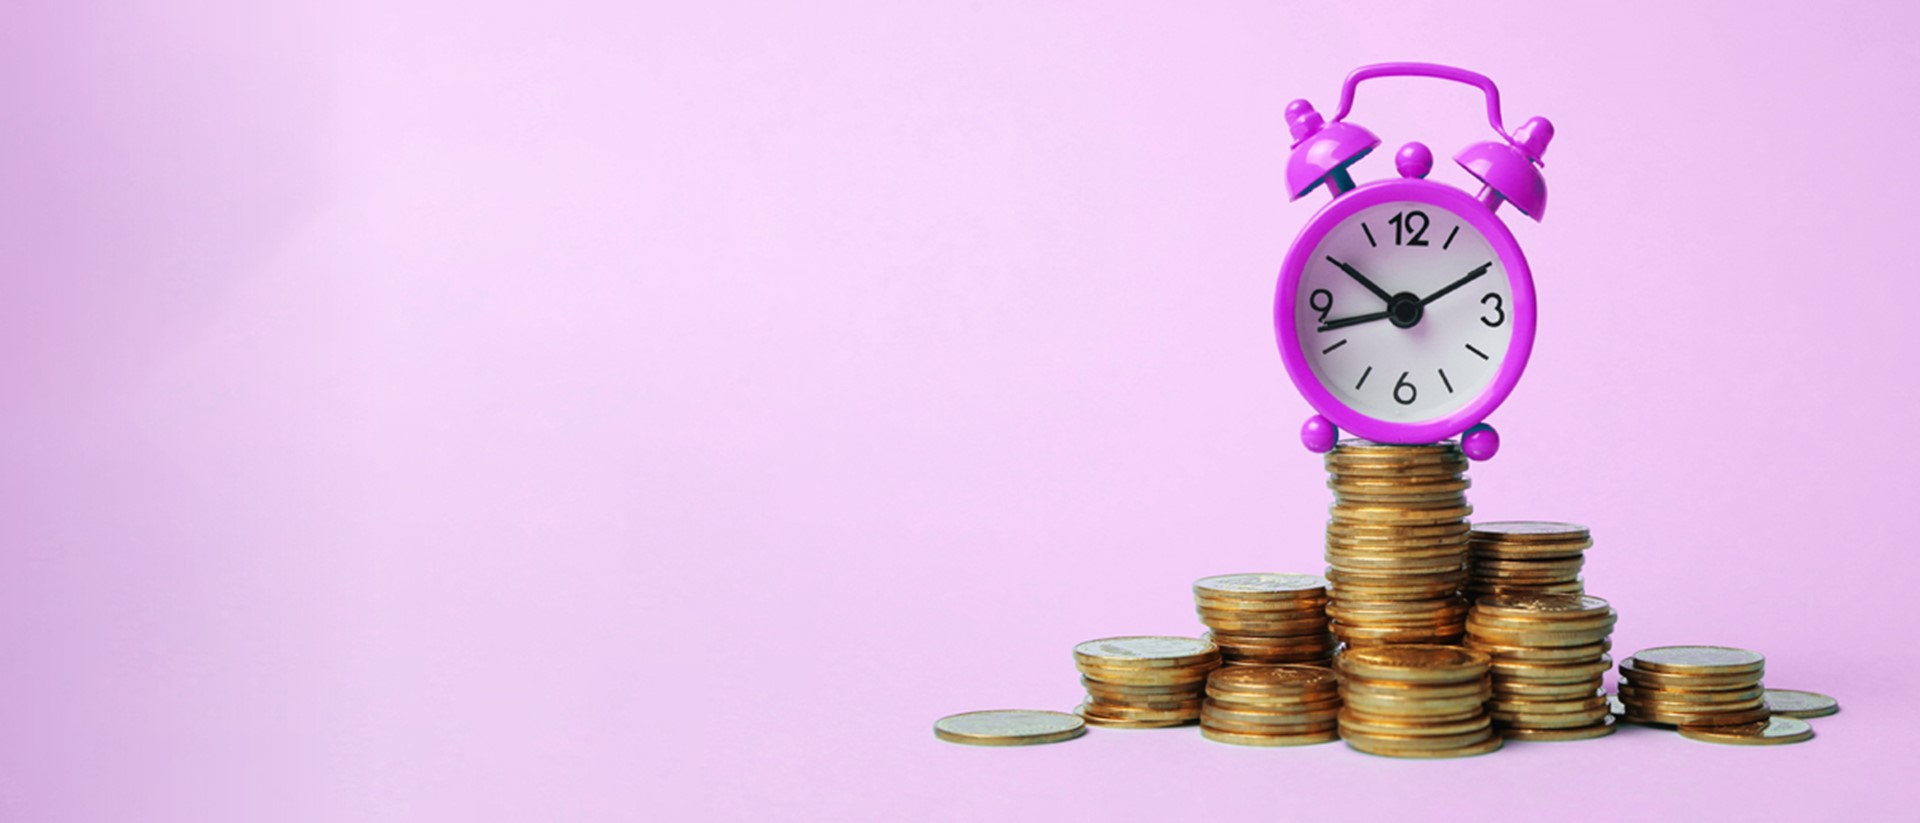 Image of a purple alarm clock sat on a pile of coins on a purple background